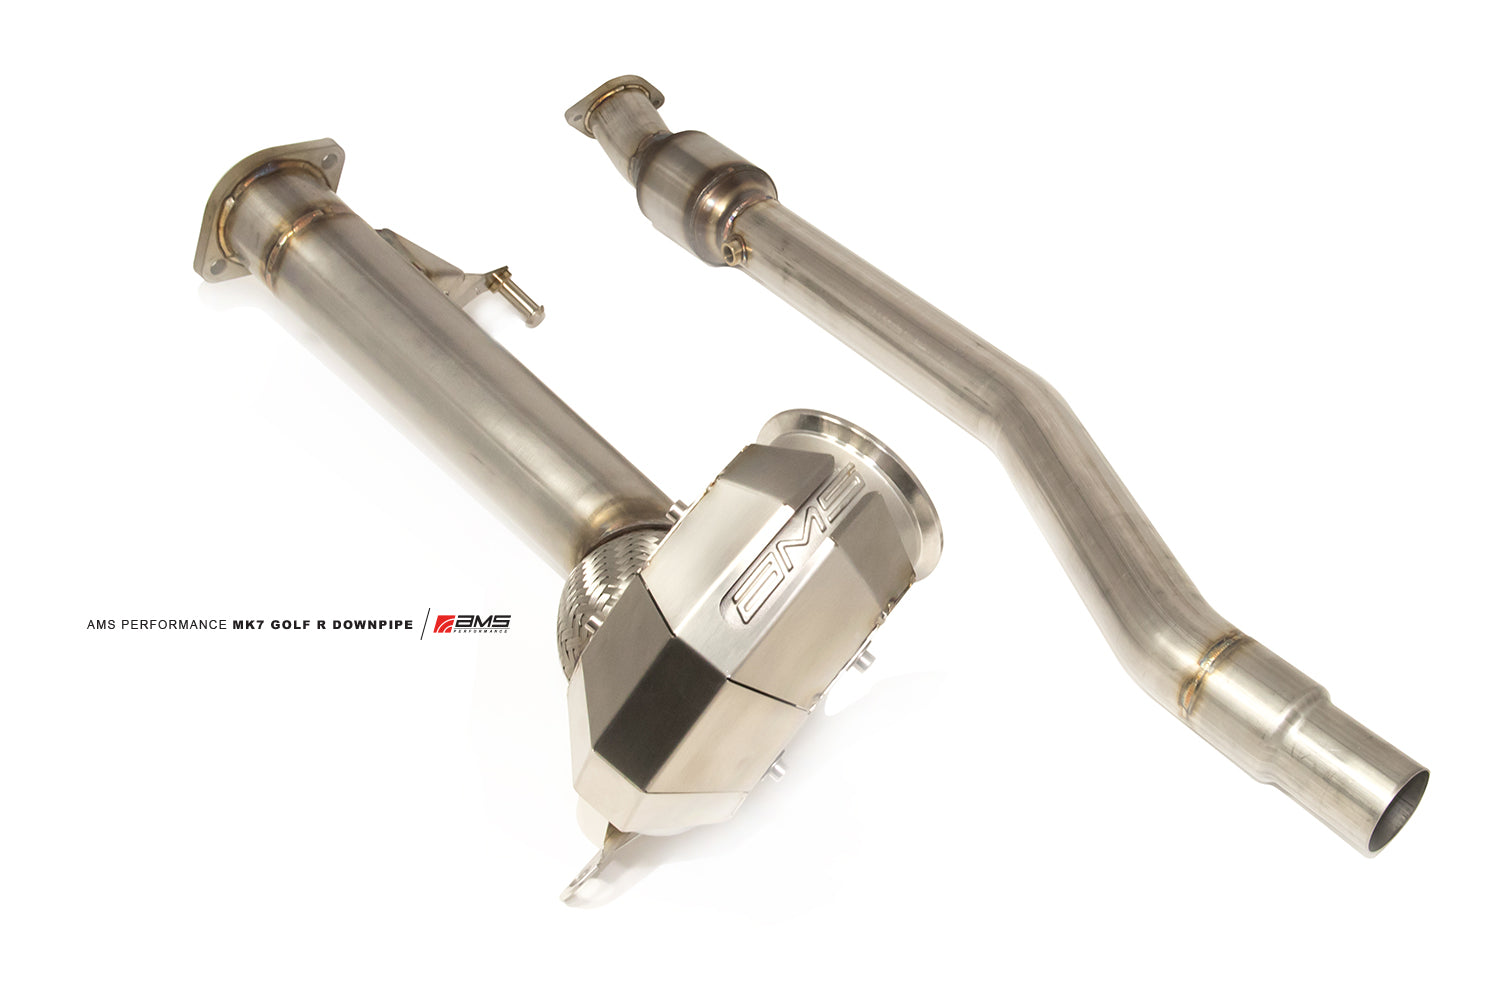 AMS AMS.21.05.0001-2 Upgraded 3″ Downpipe VW GOLF R MK7 (race) Photo-1 